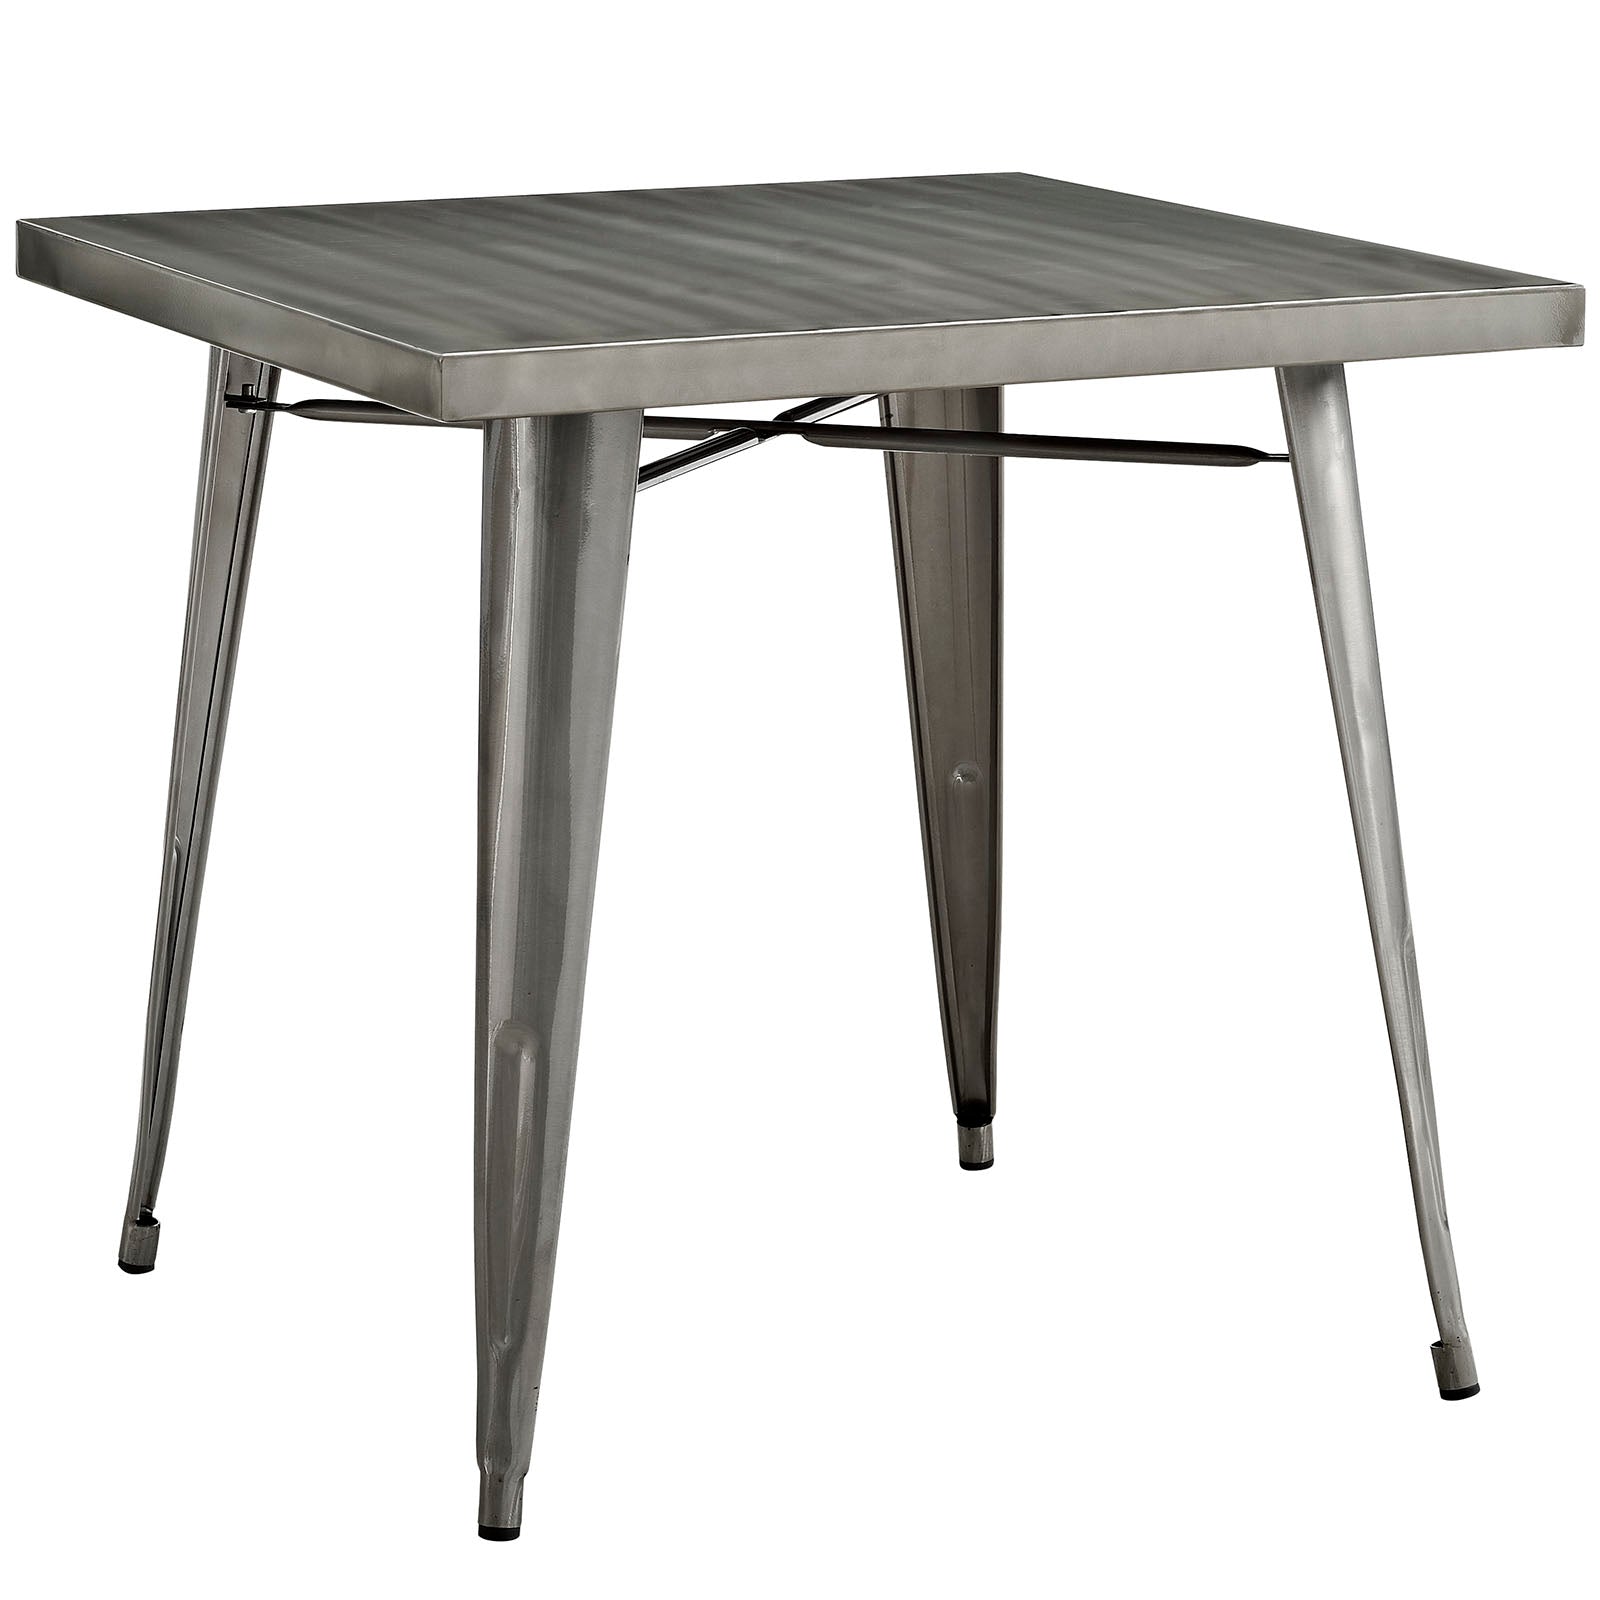 Modway Dining Tables - Alacrity Square Dining Table Gunmetal